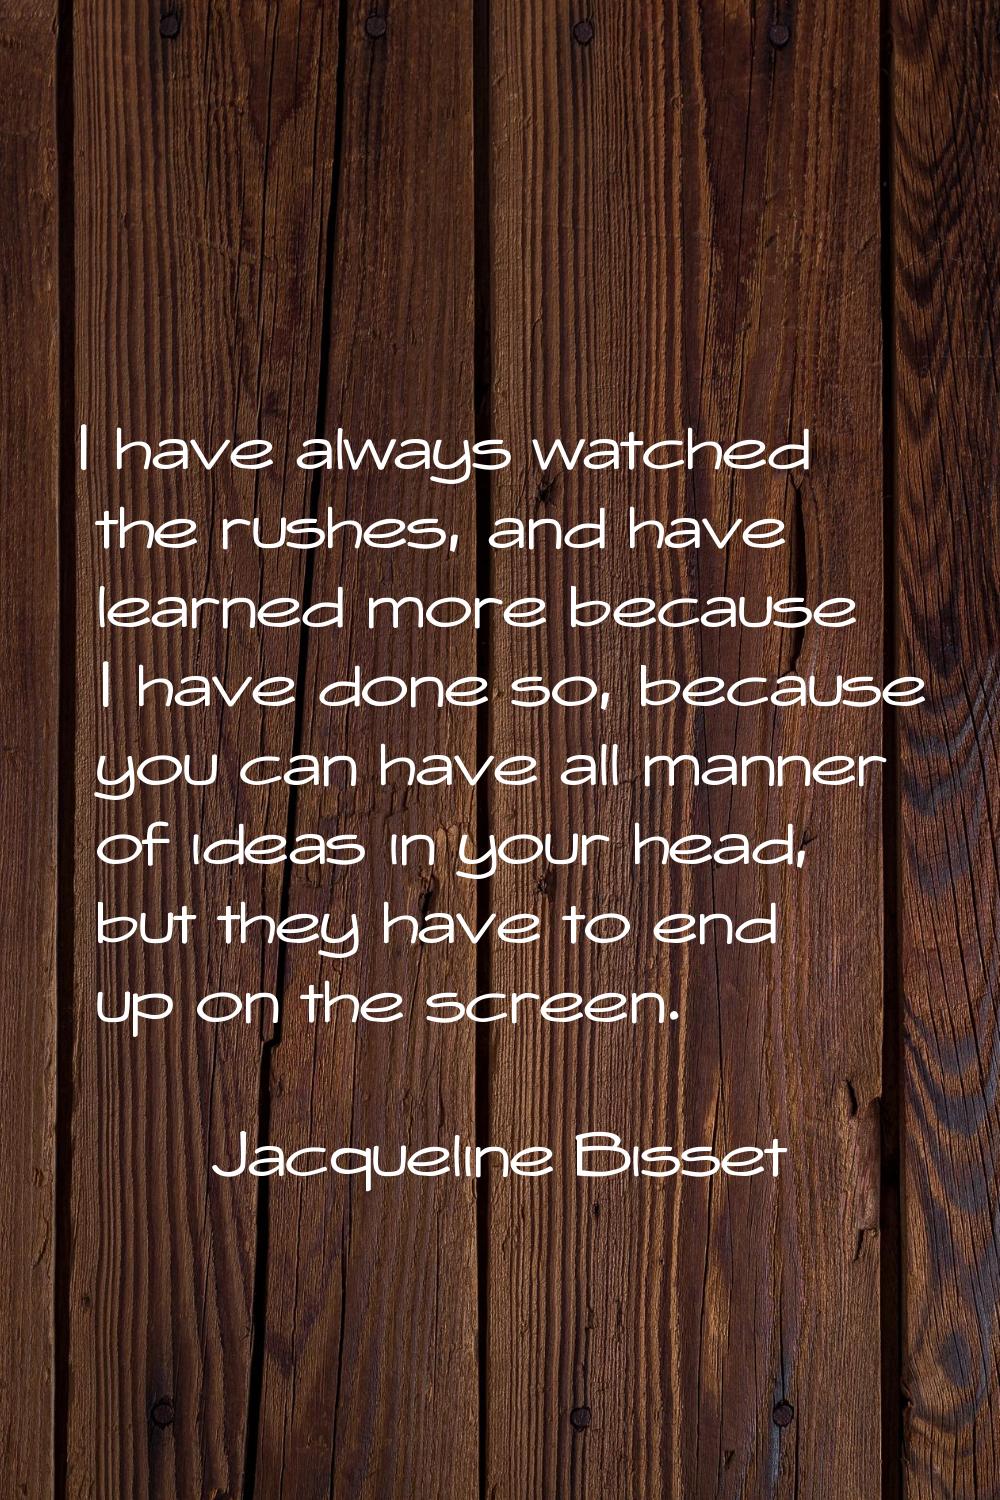 I have always watched the rushes, and have learned more because I have done so, because you can hav